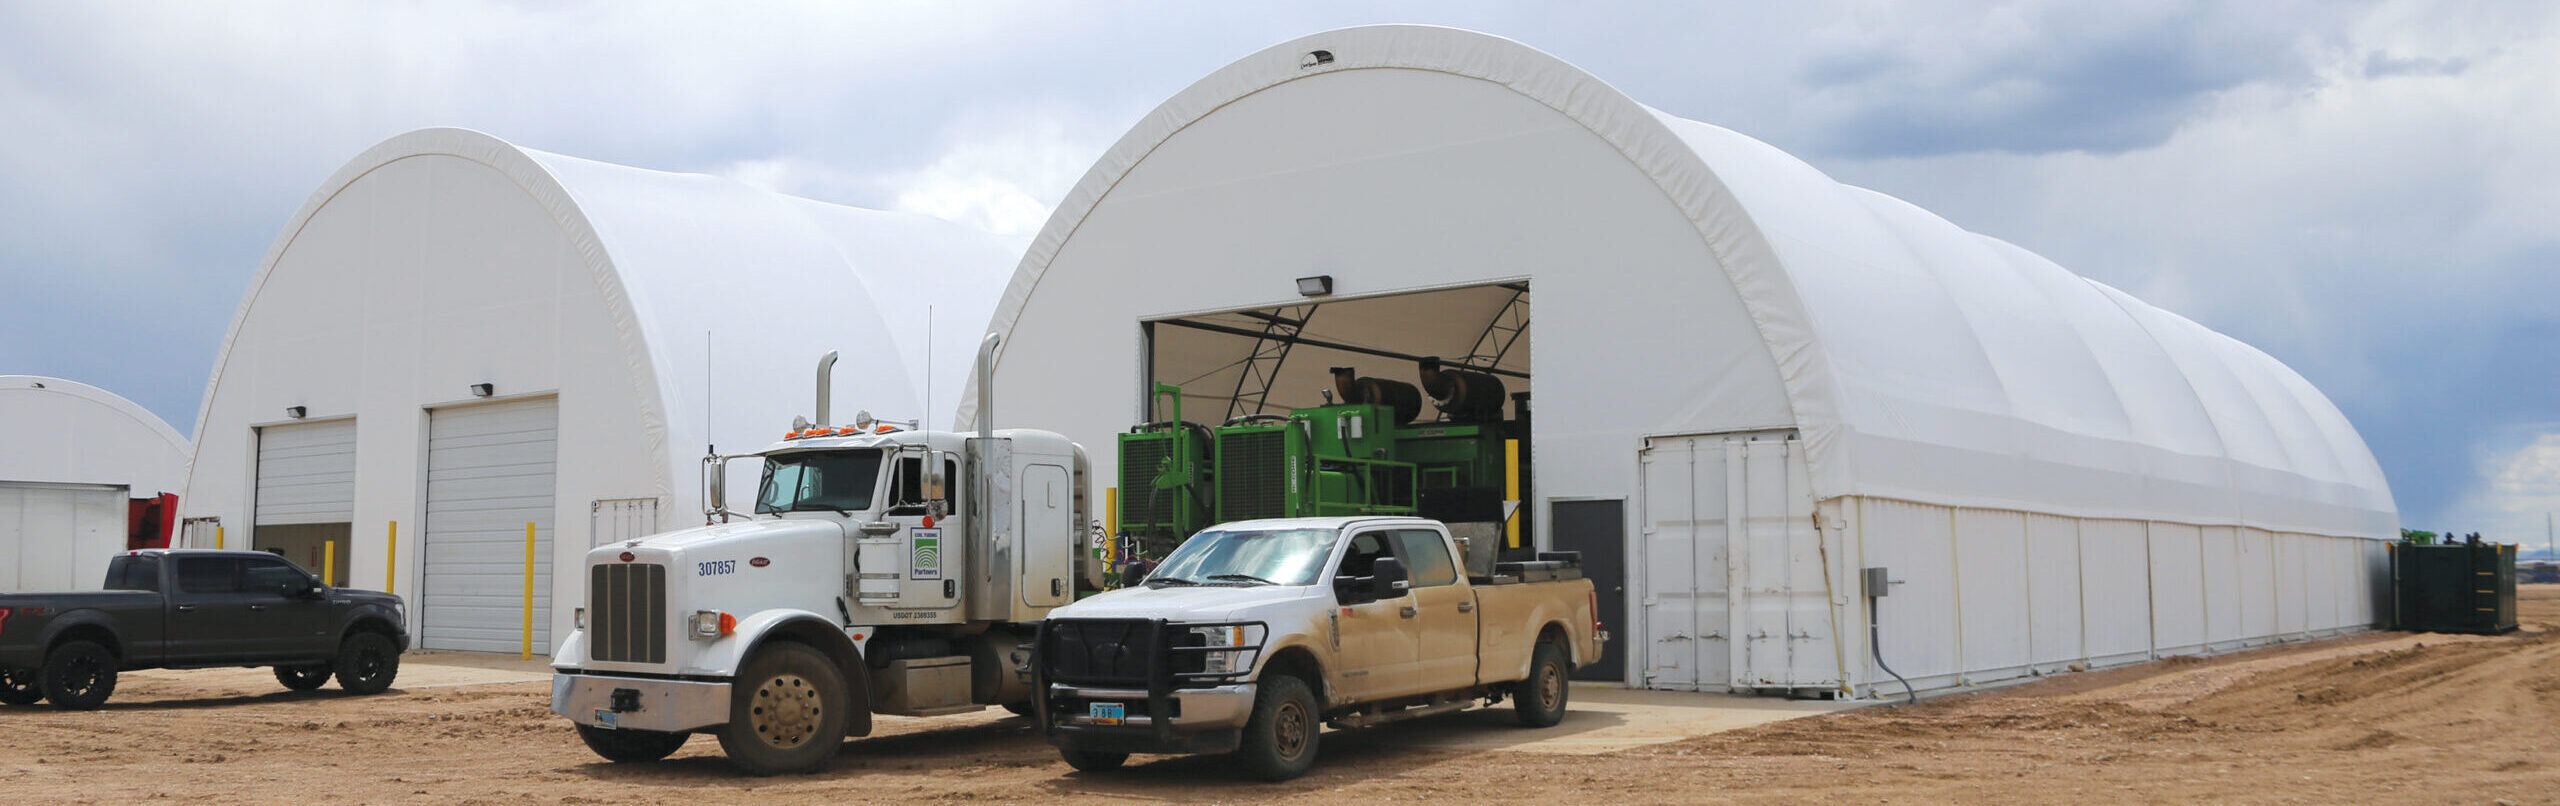 Trucks parked outside two ClearSpan truss arch buildings